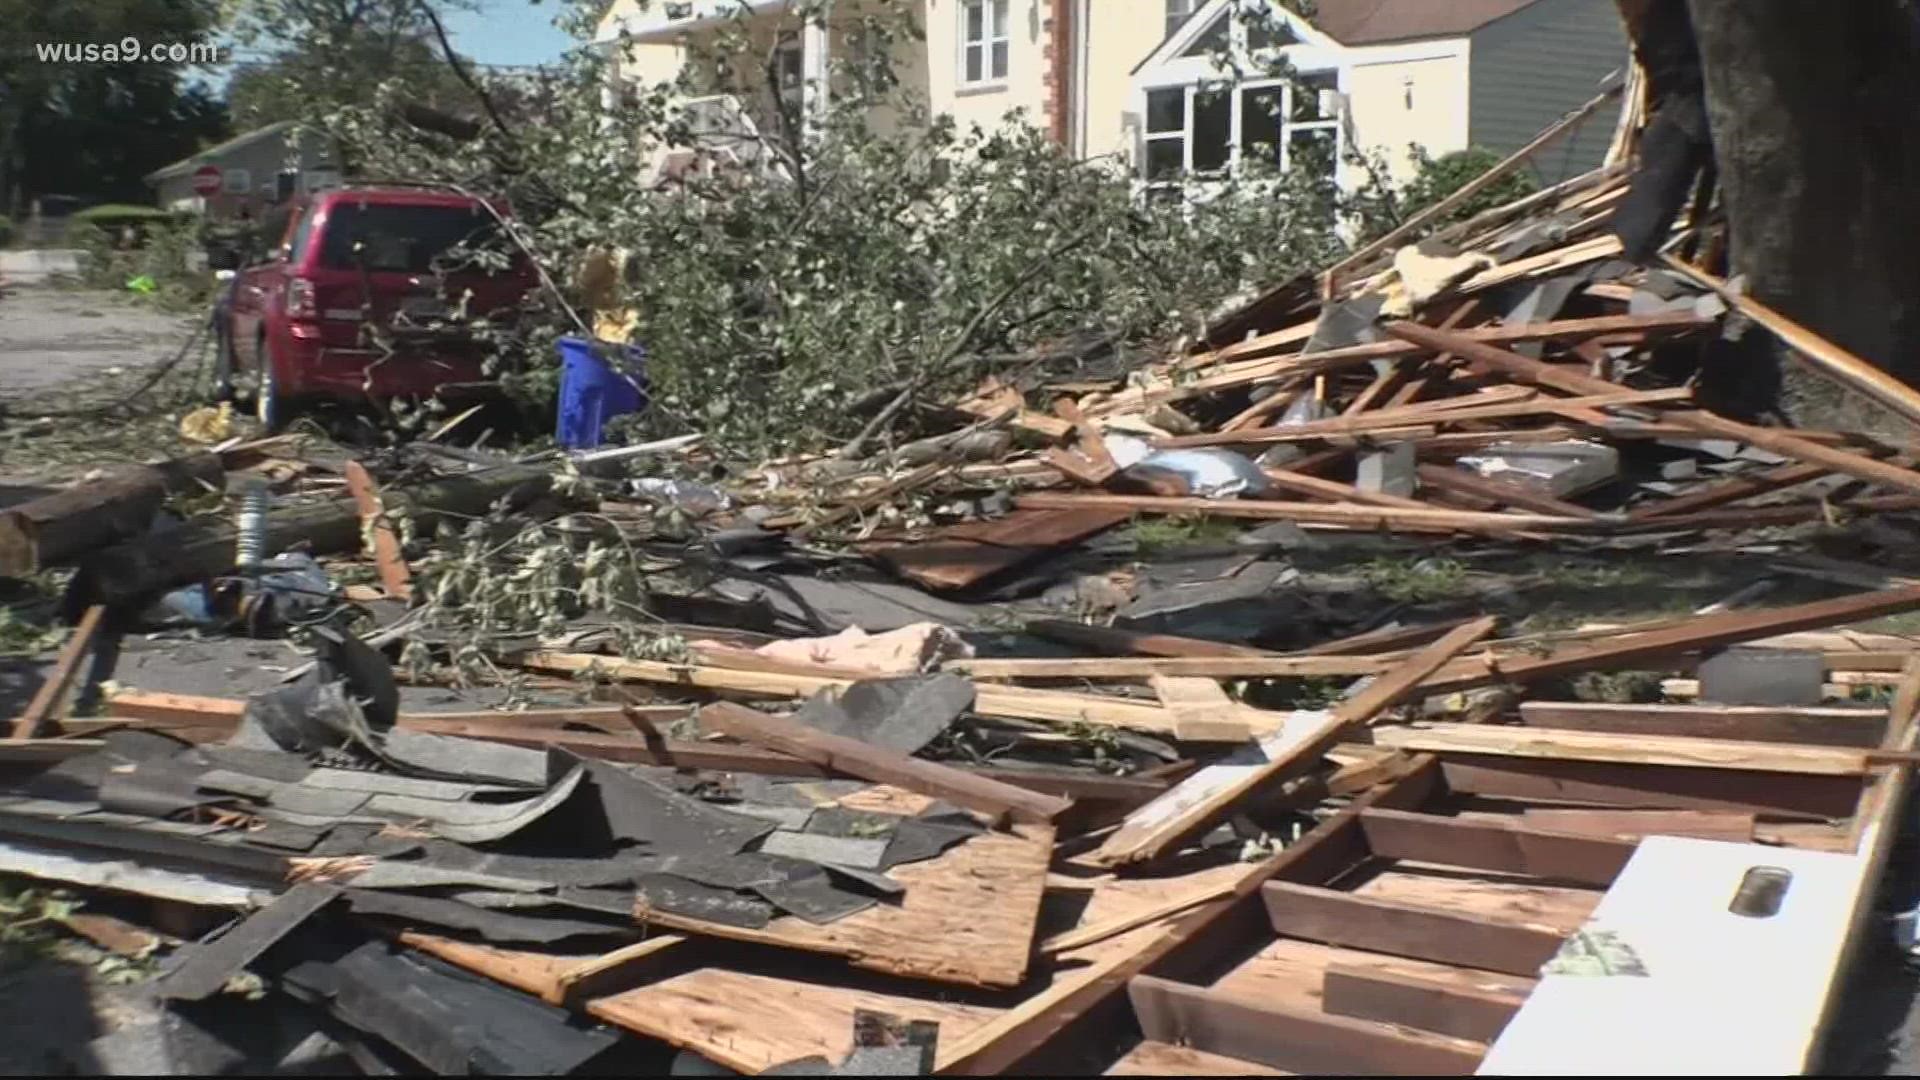 A tornado touched down in Maryland destroying parts of Annapolis.